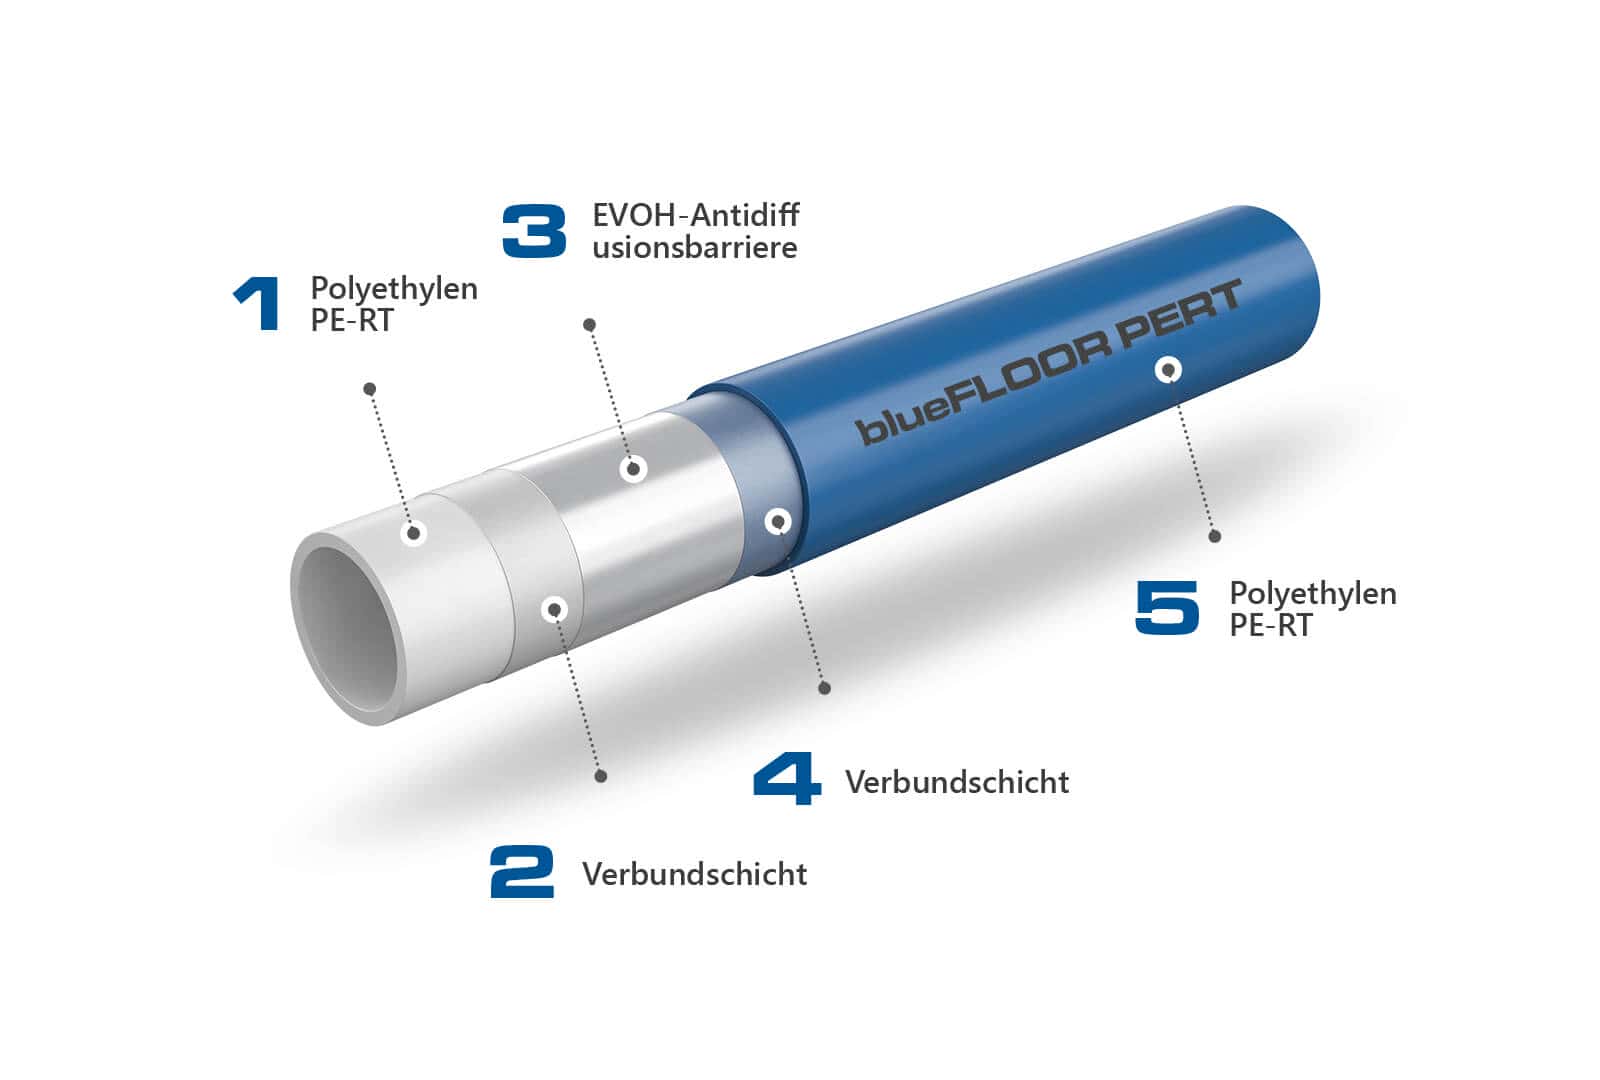 KAN-therm TBS-System – blueFLOOR PERT-Rohre mit einer EVOH-Antidiffusionsbarriere